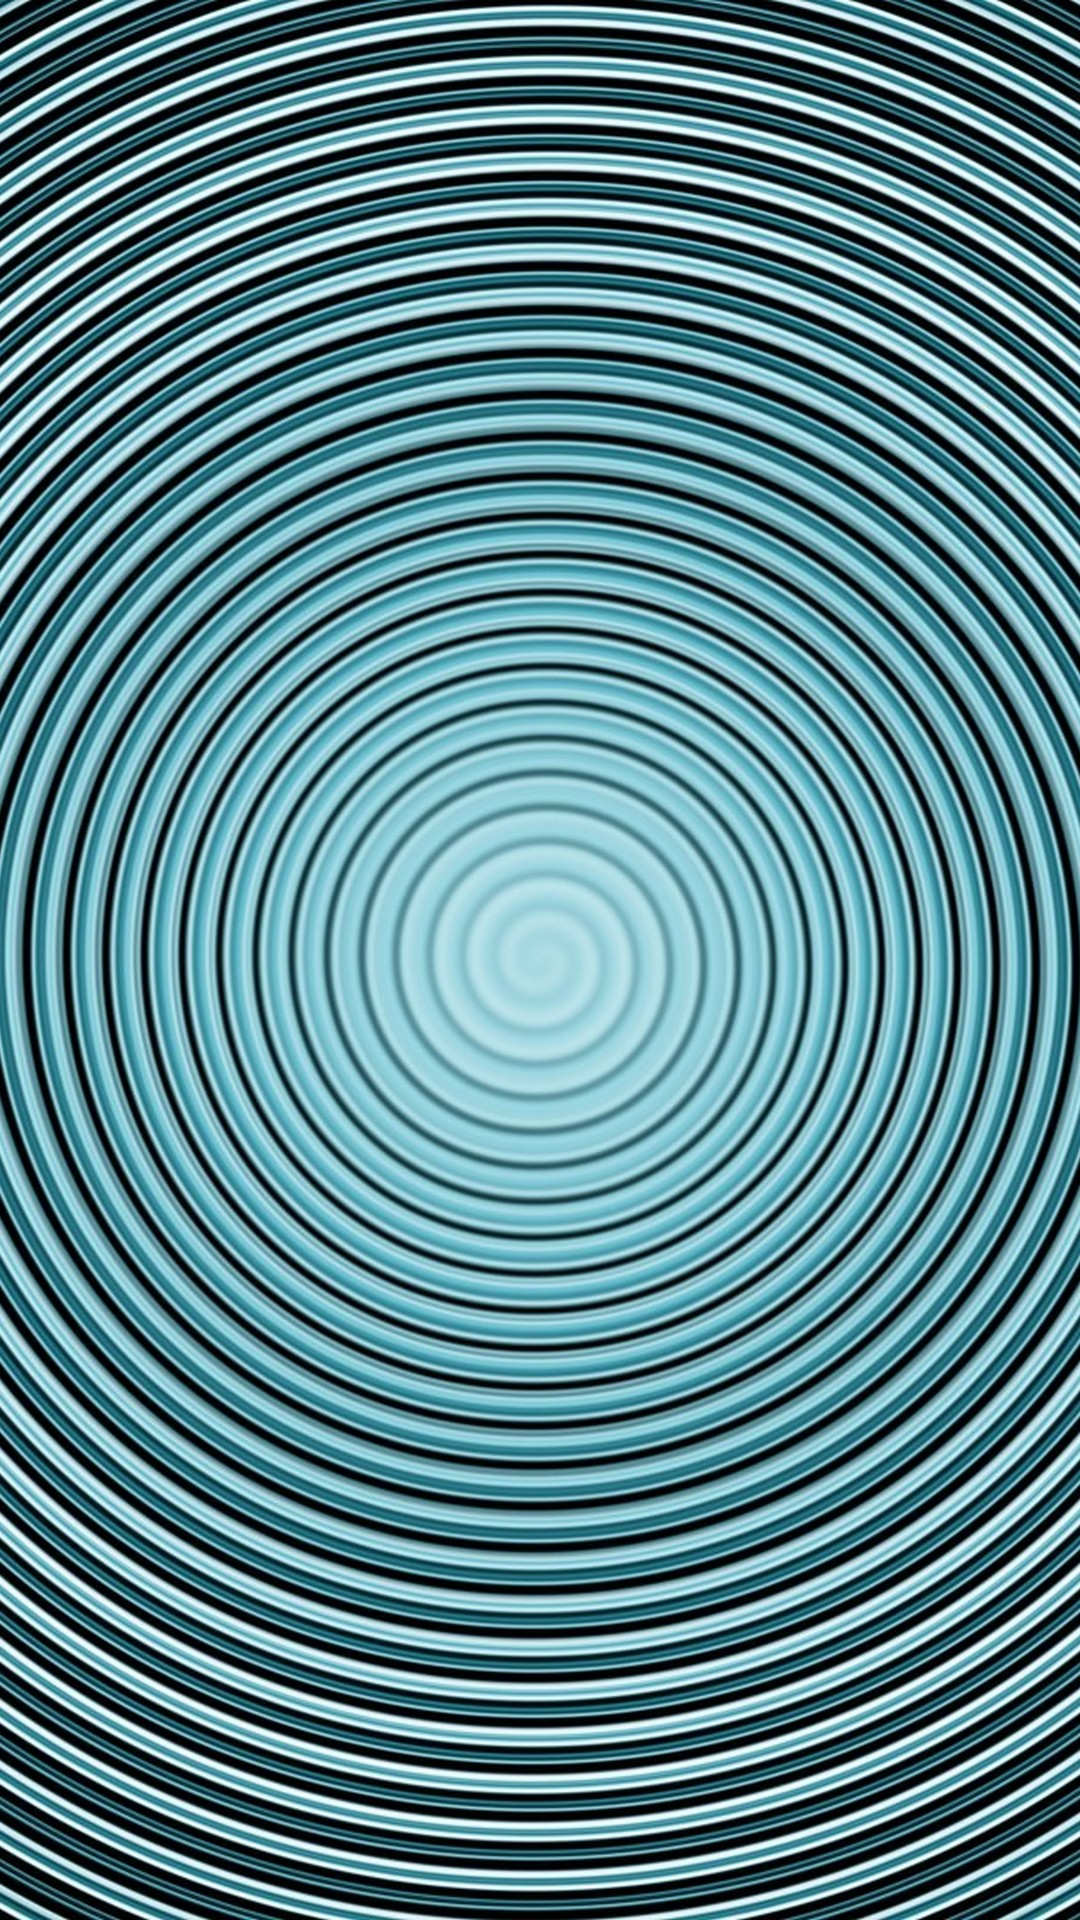 Cool Trippy Wallpaper For iPhone resolution 1080x1920